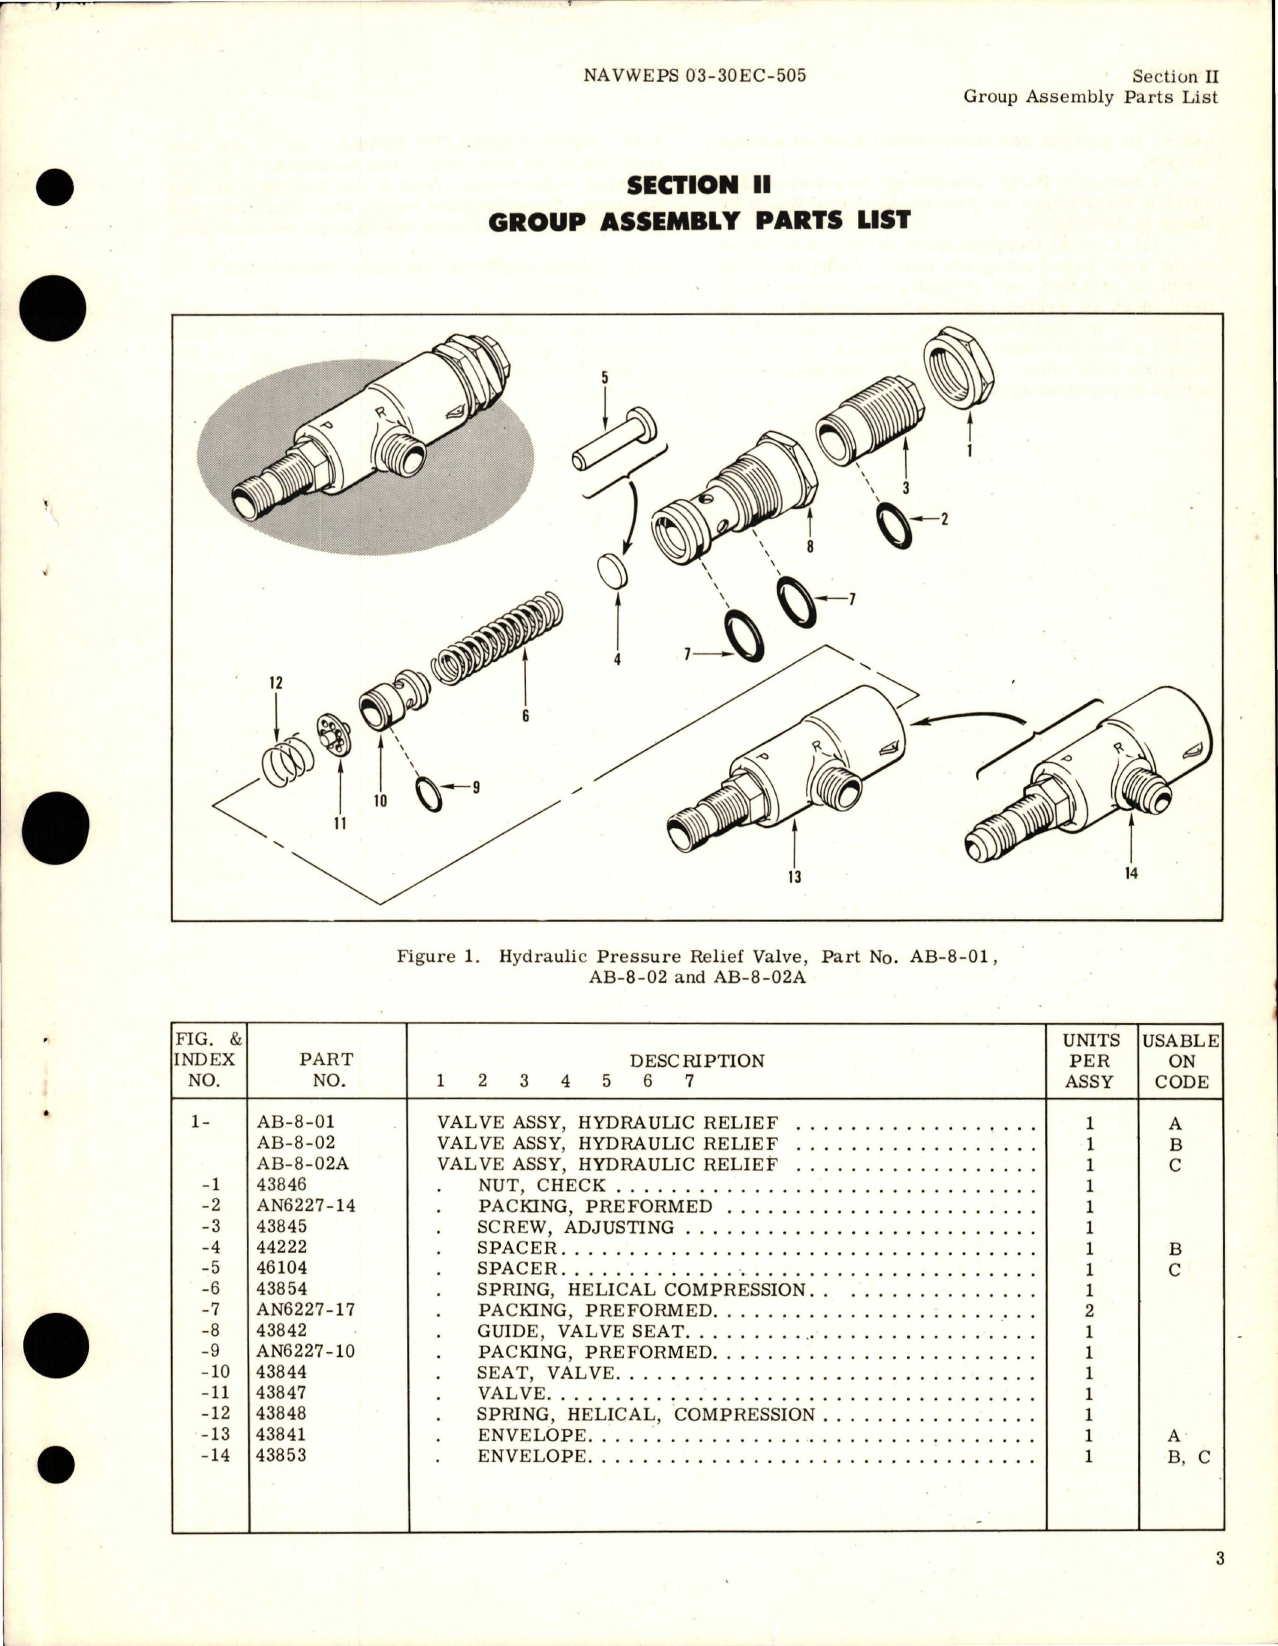 Sample page 5 from AirCorps Library document: Illustrated Parts Breakdown for Hydraulic Pressure Relief Valves